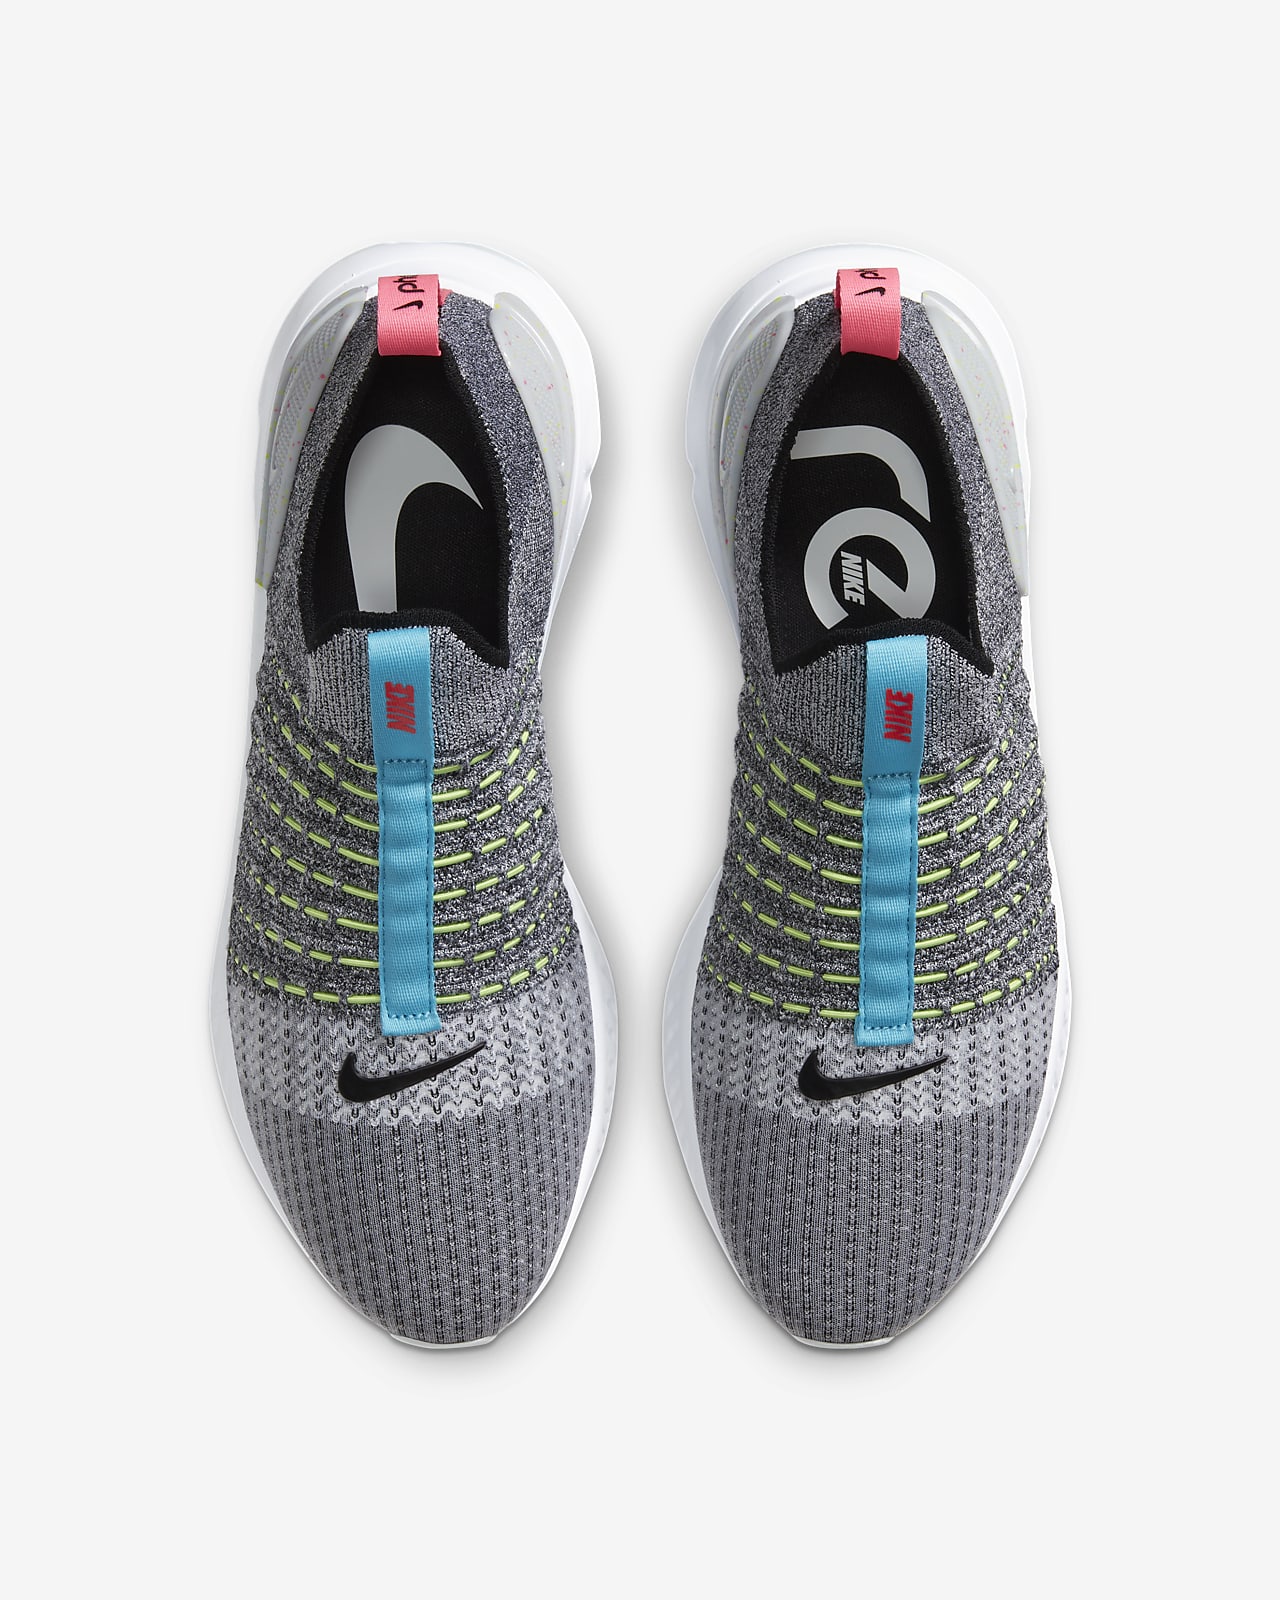 new nike react running shoes